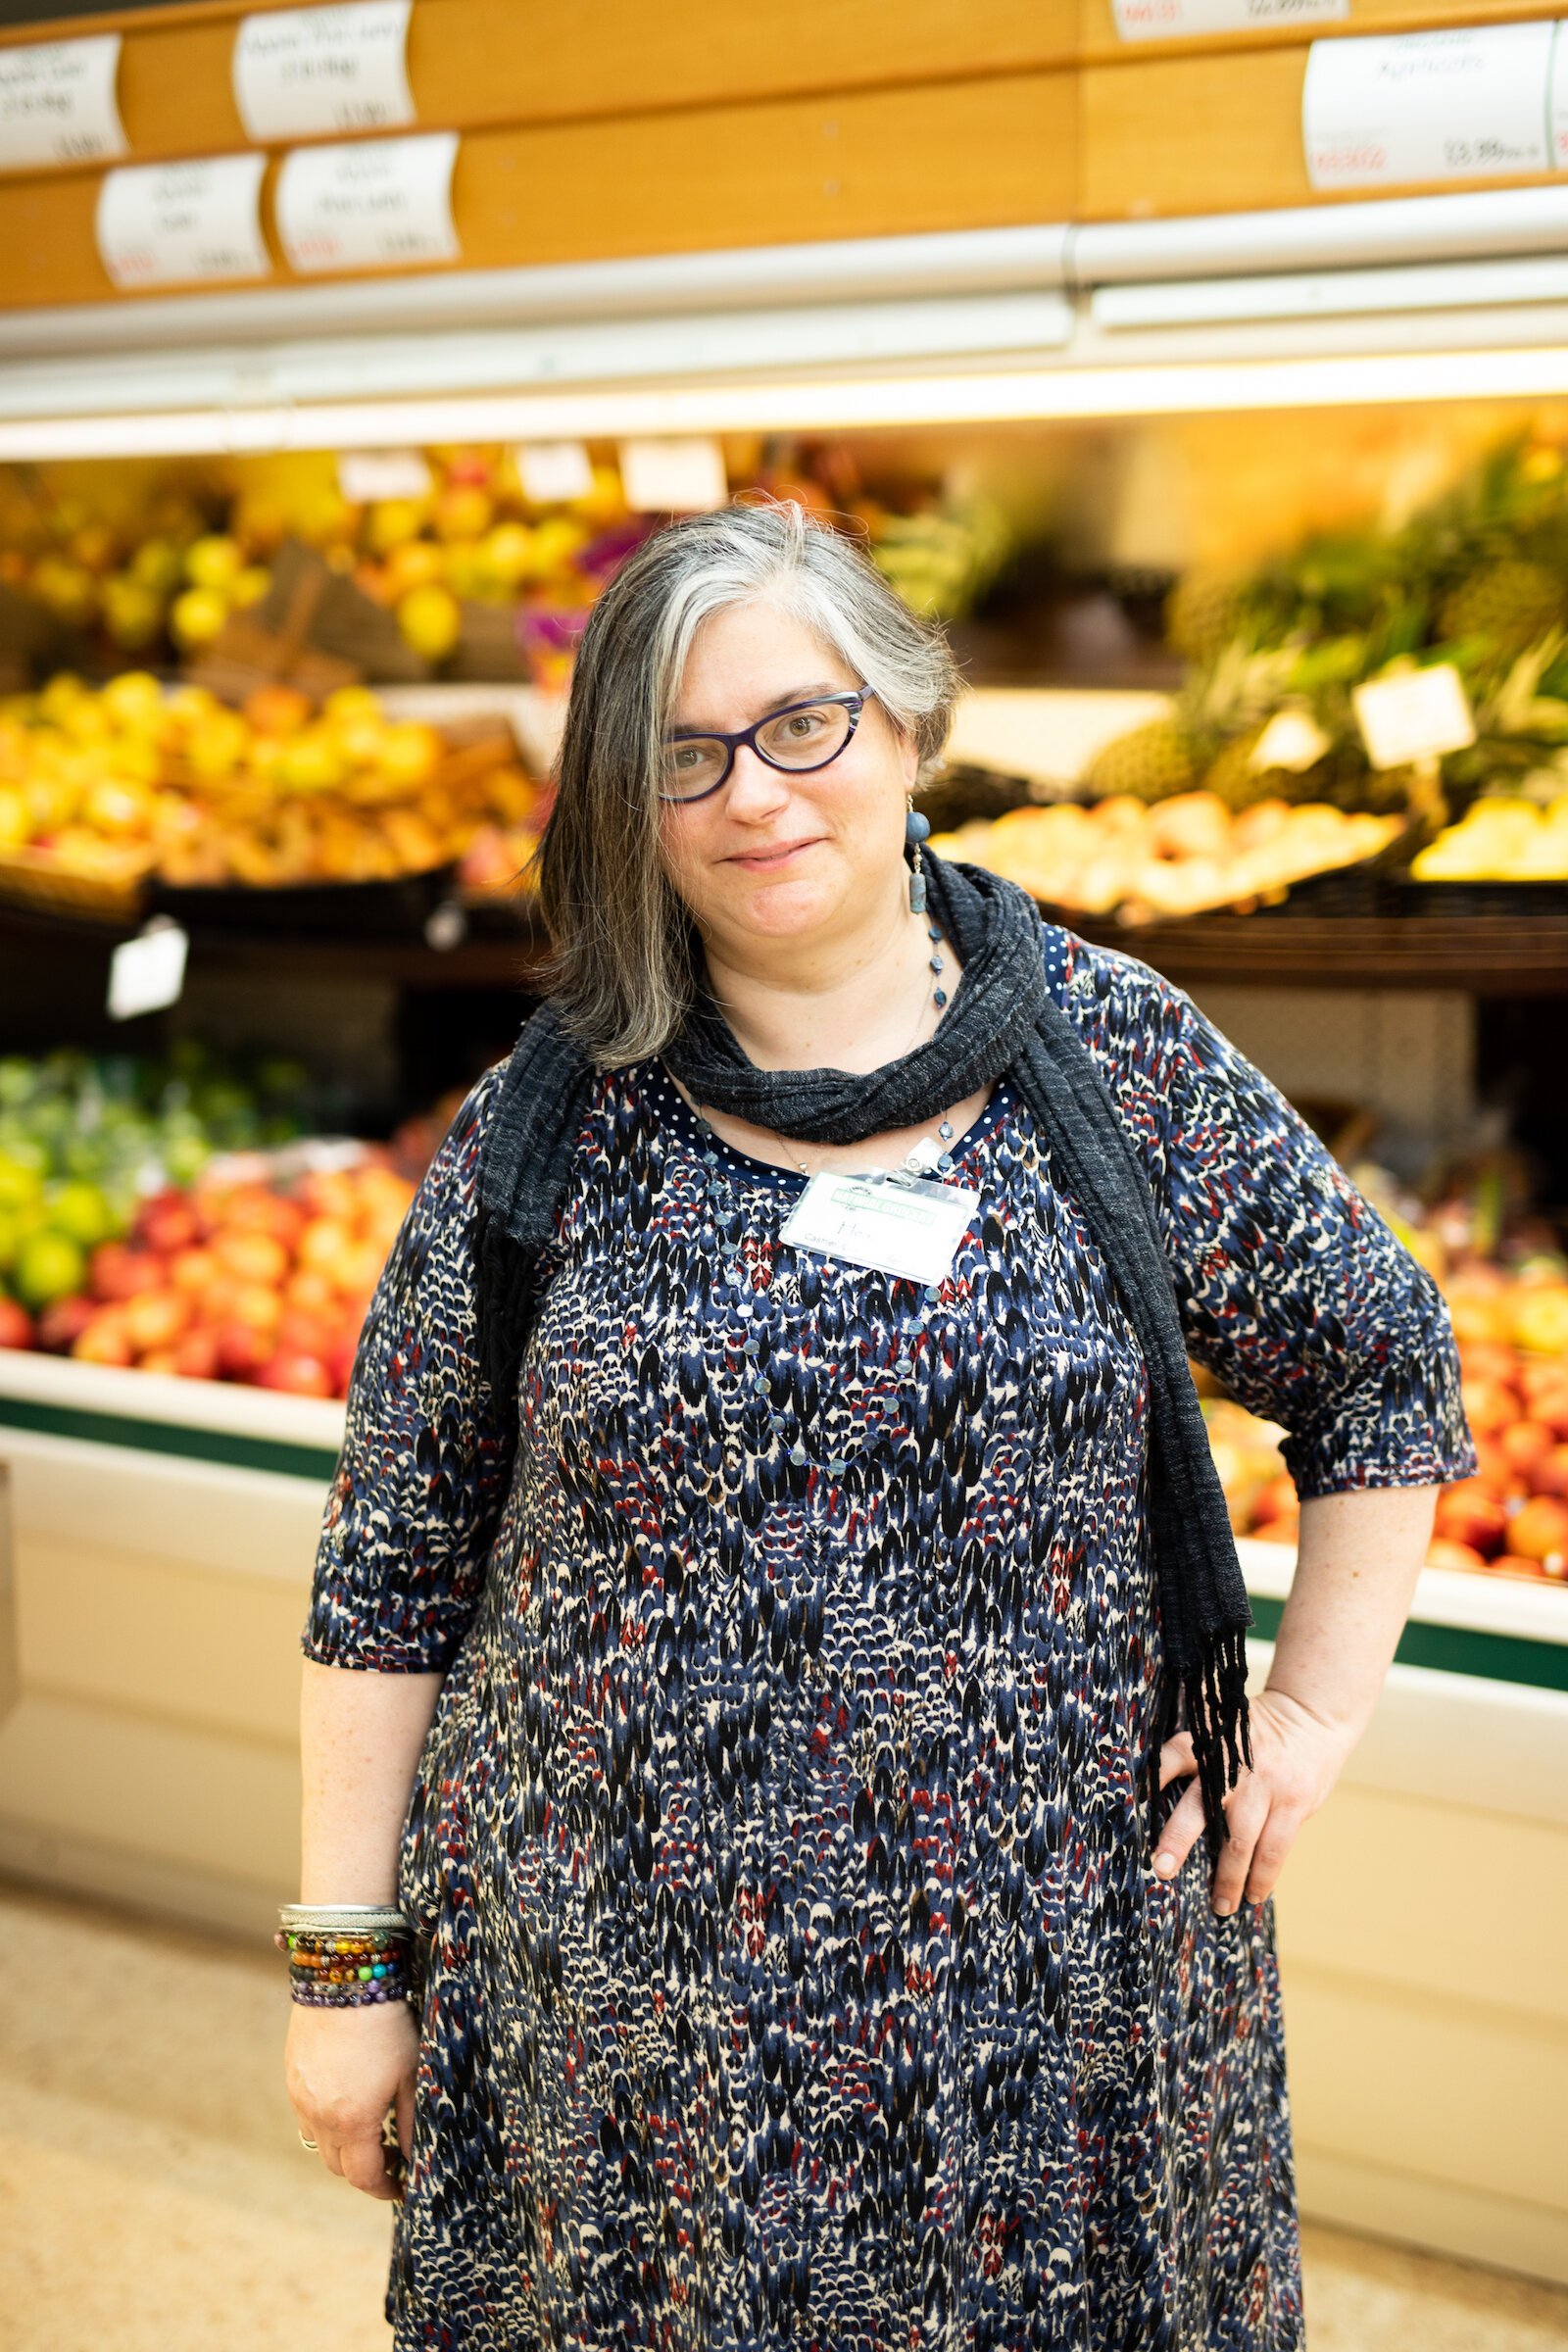 Heather Grady is Front End & Marketing Manager at 3 Rivers Natural Grocery Food Co-op & Deli.